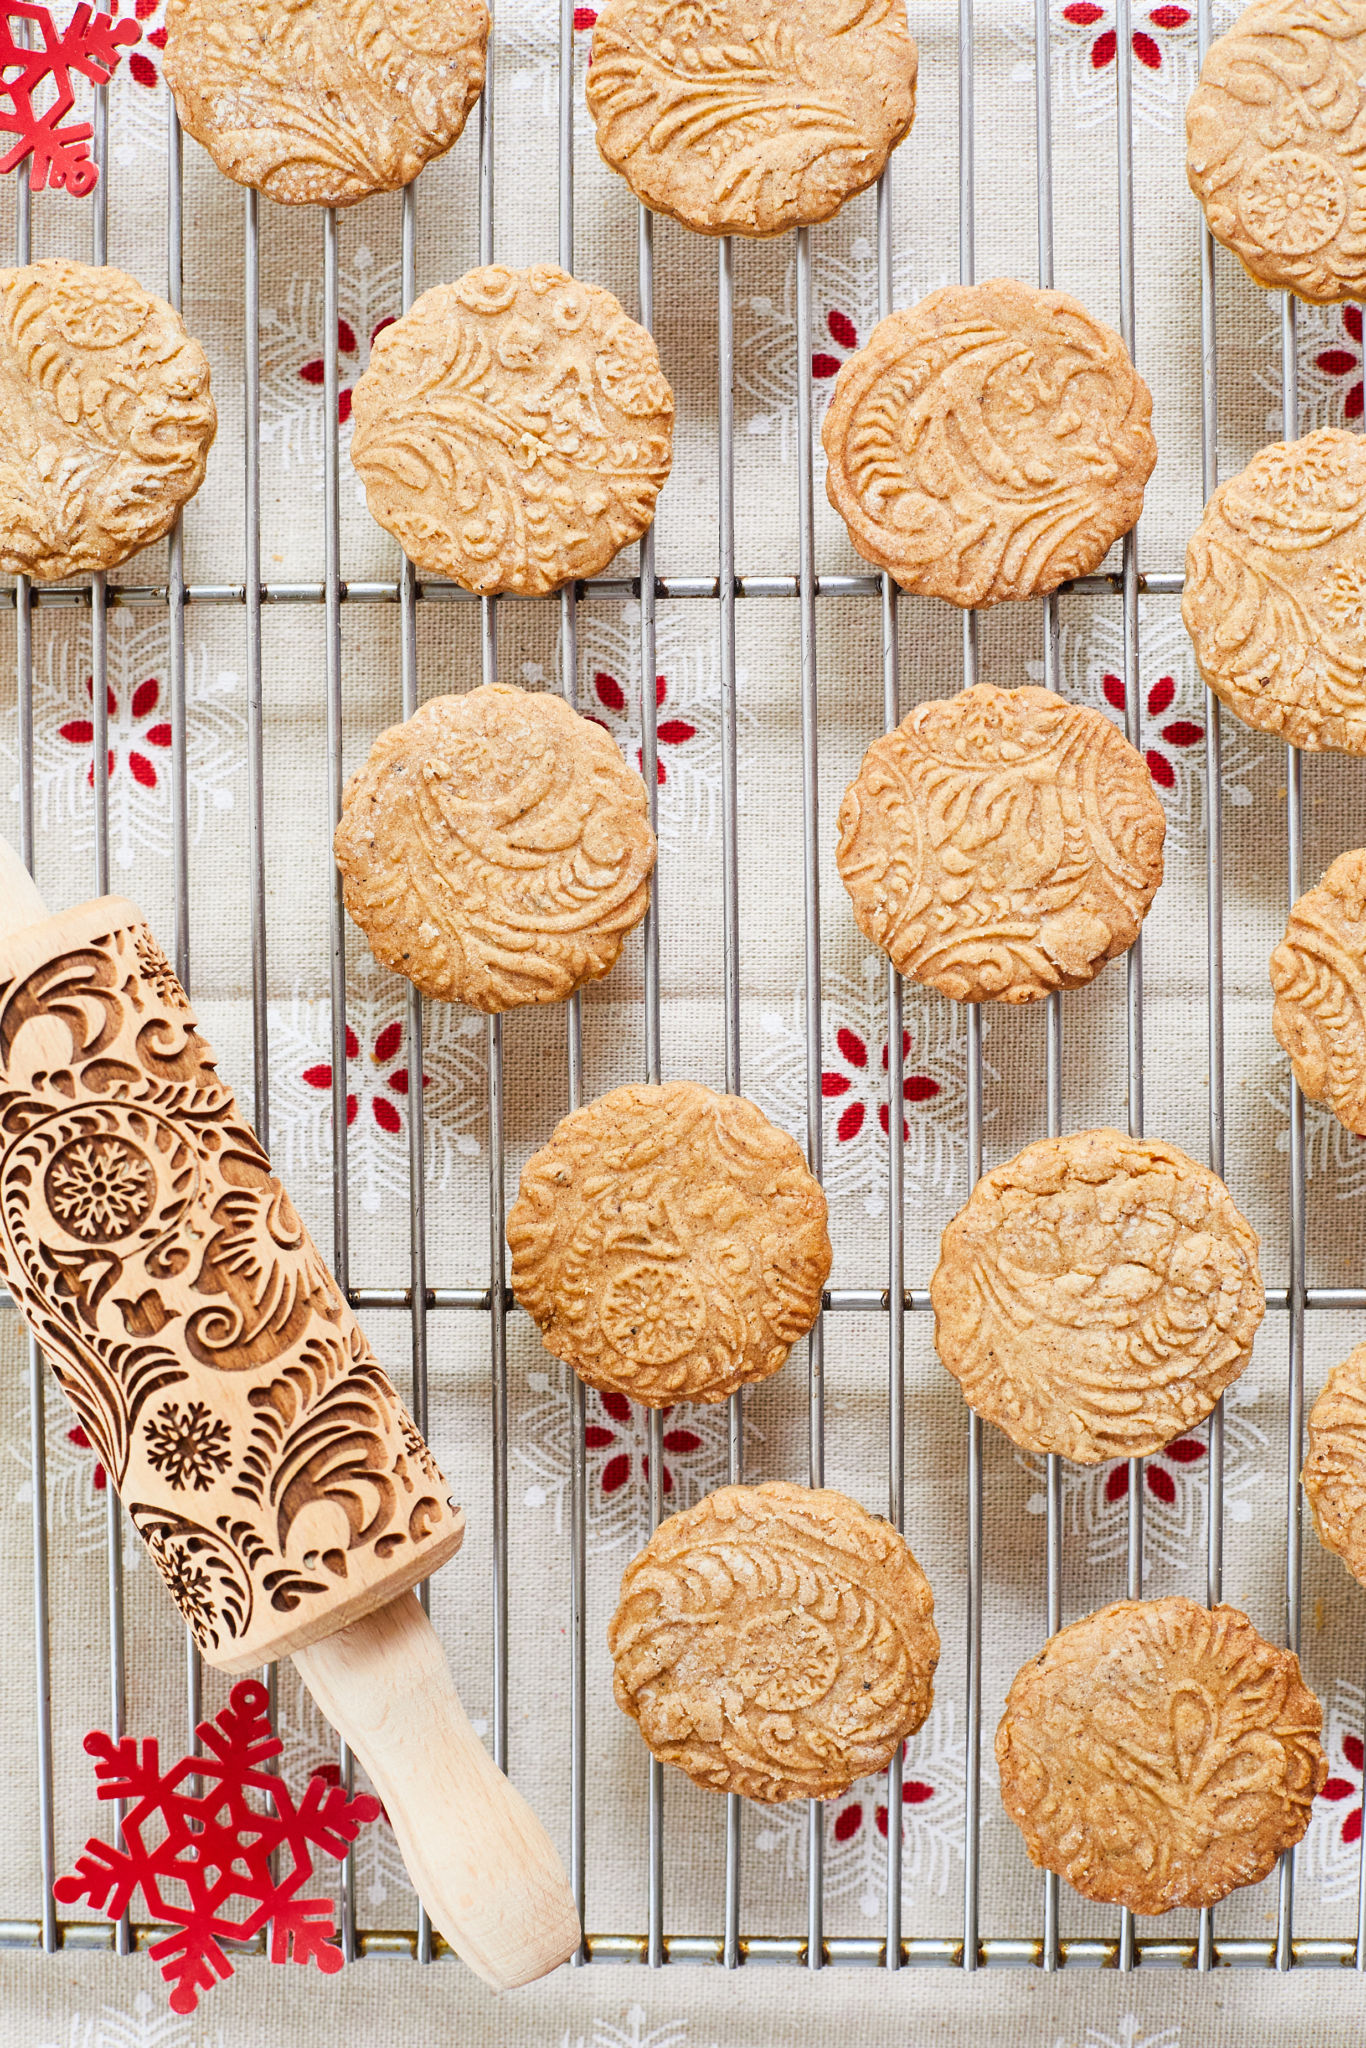 Speculass, beige shortbread with festive designs, rest on a wire rack next to a special Speculass rolling pin.